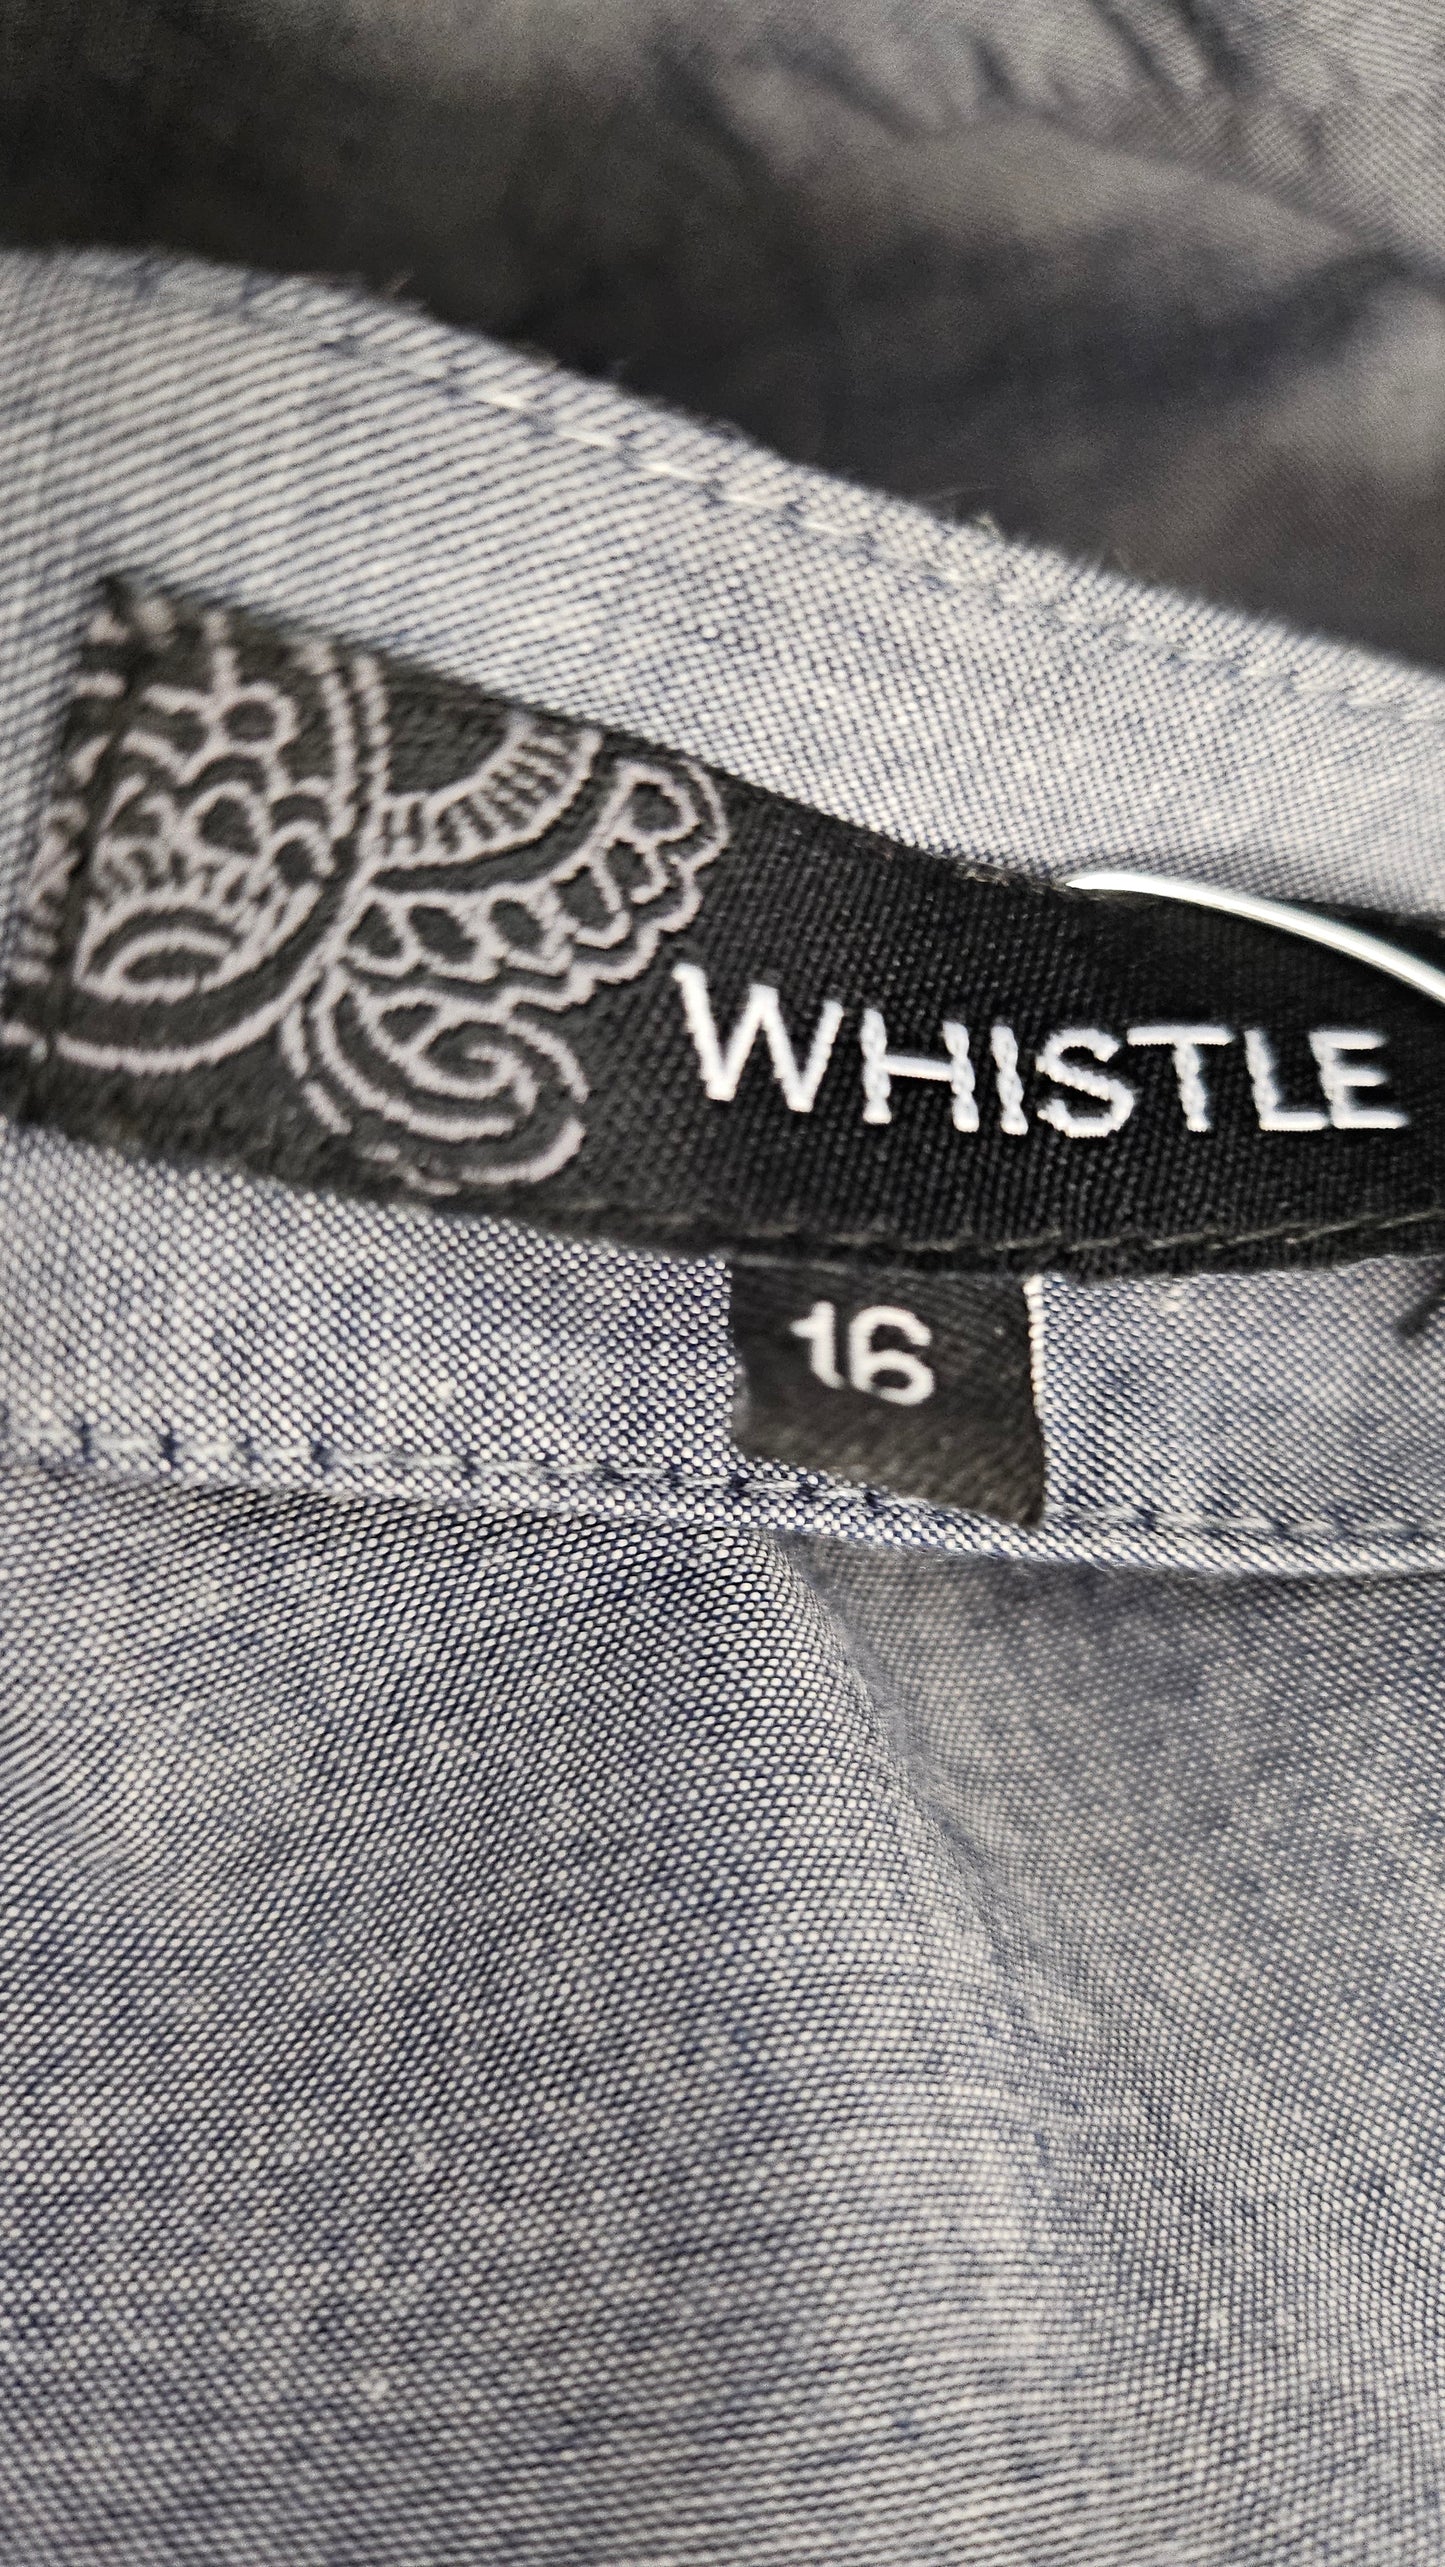 Whistle Blue Chambray Top (16)